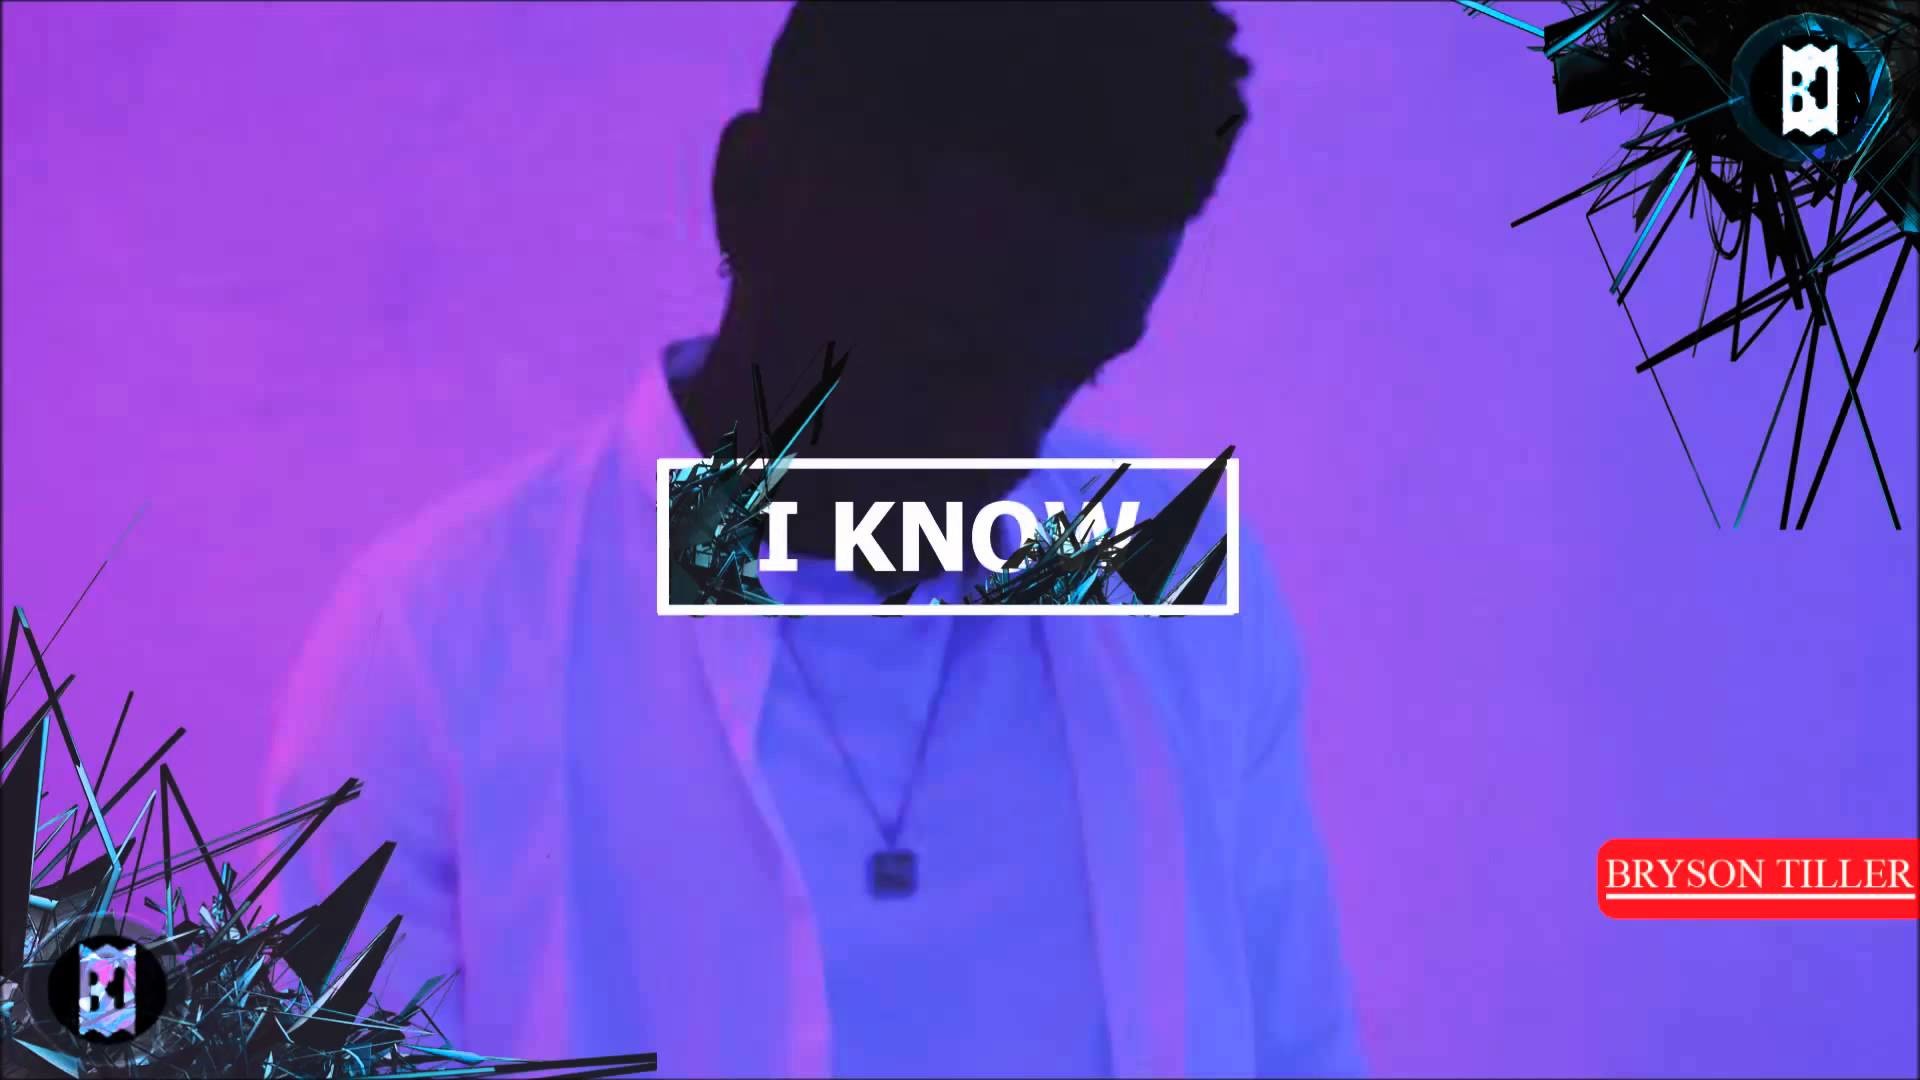 1920x1080 Bryson Tiller ( Feat Partynextdoor) Type Beat 2015 | ” I KNOW” (Prod.by  George thvkid)